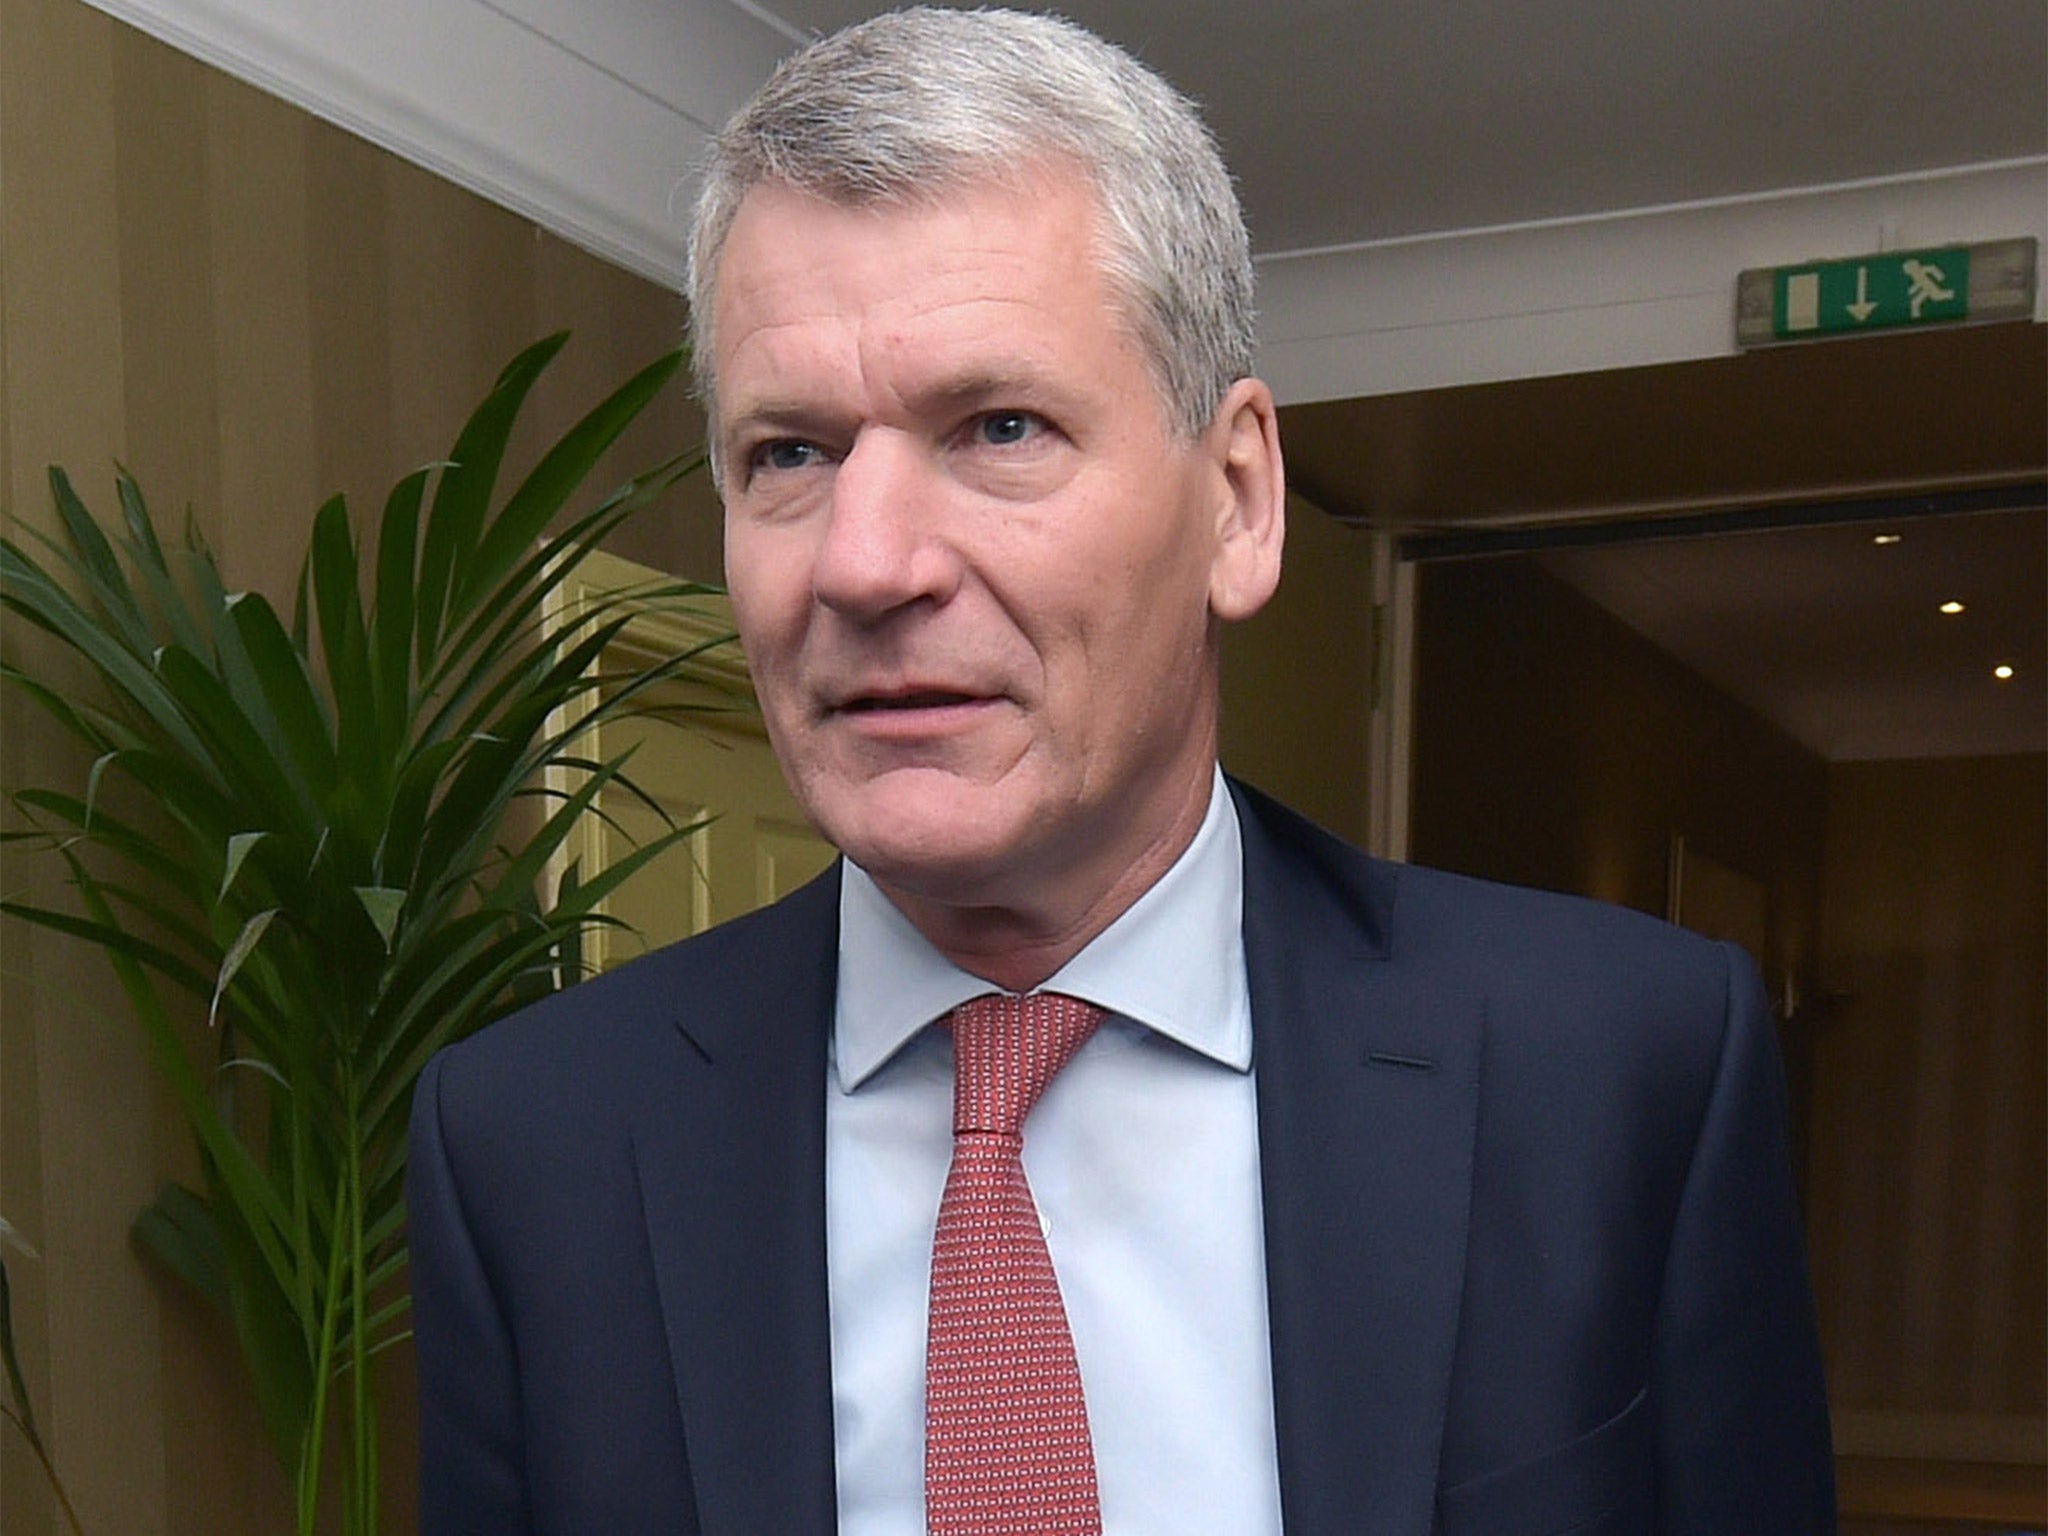 Manchester United’s David Gill has won the Home Nations’ place on the Fifa executive committee